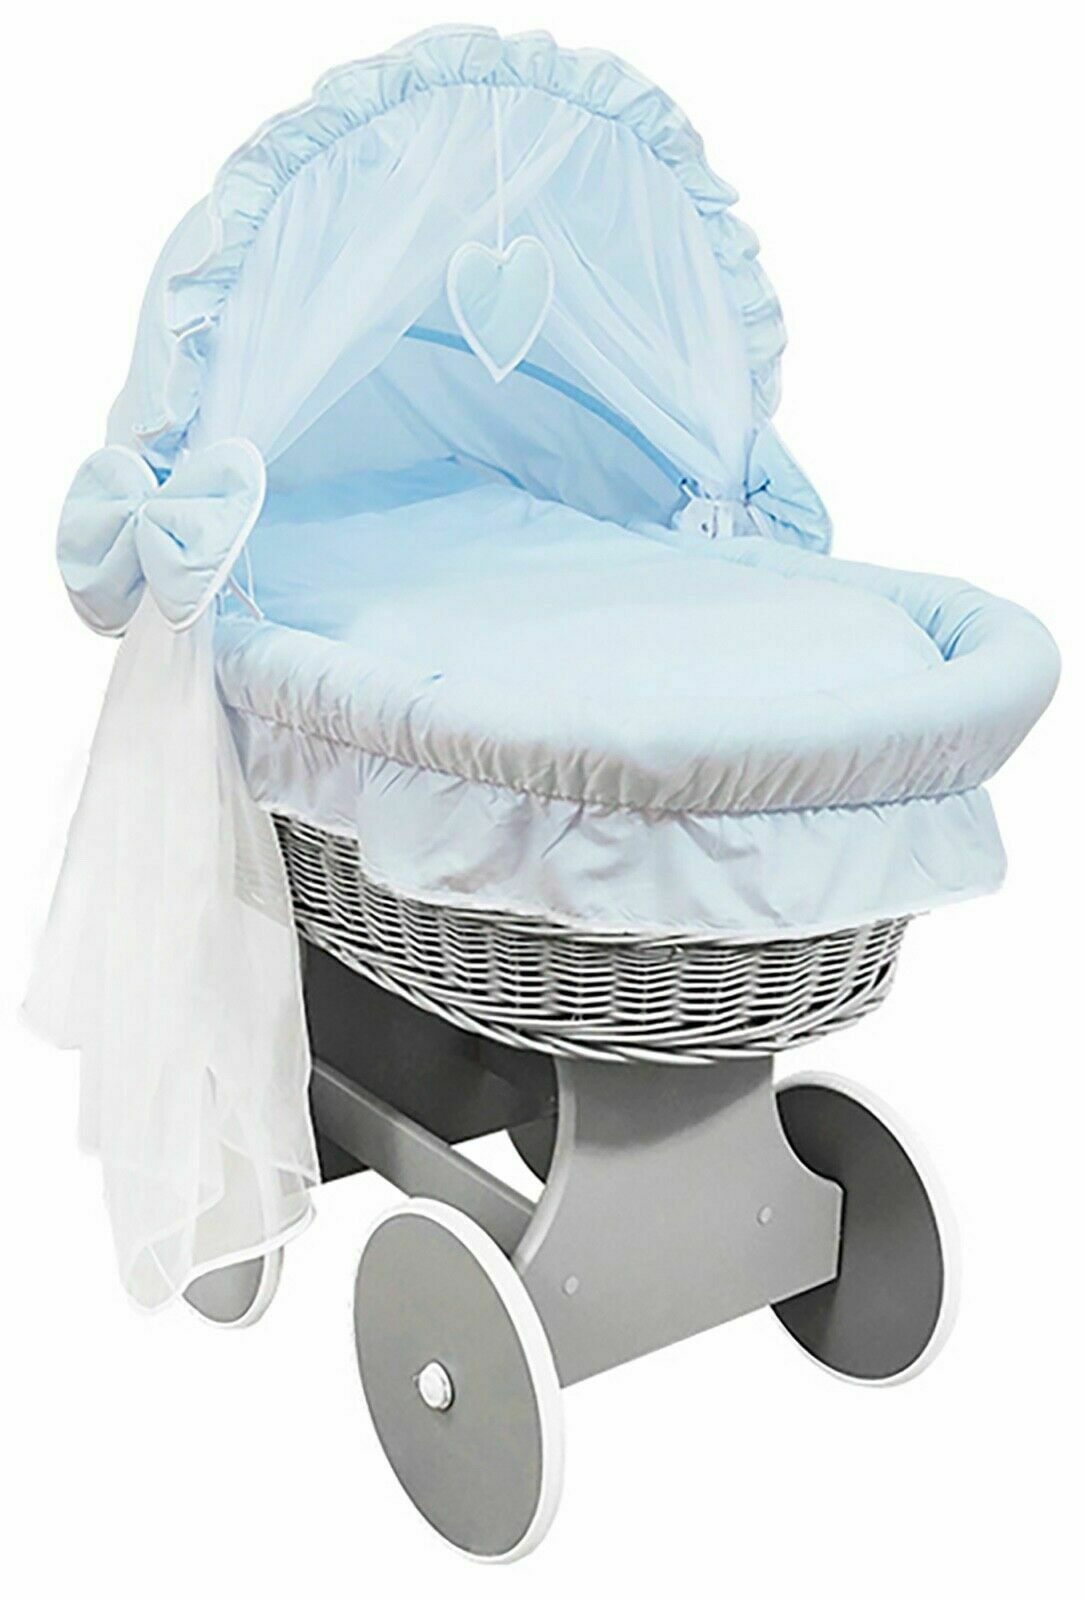 Grey Wicker Wheels Crib/Baby Moses Basket & Complete Bedding Blue - 100% Cotton